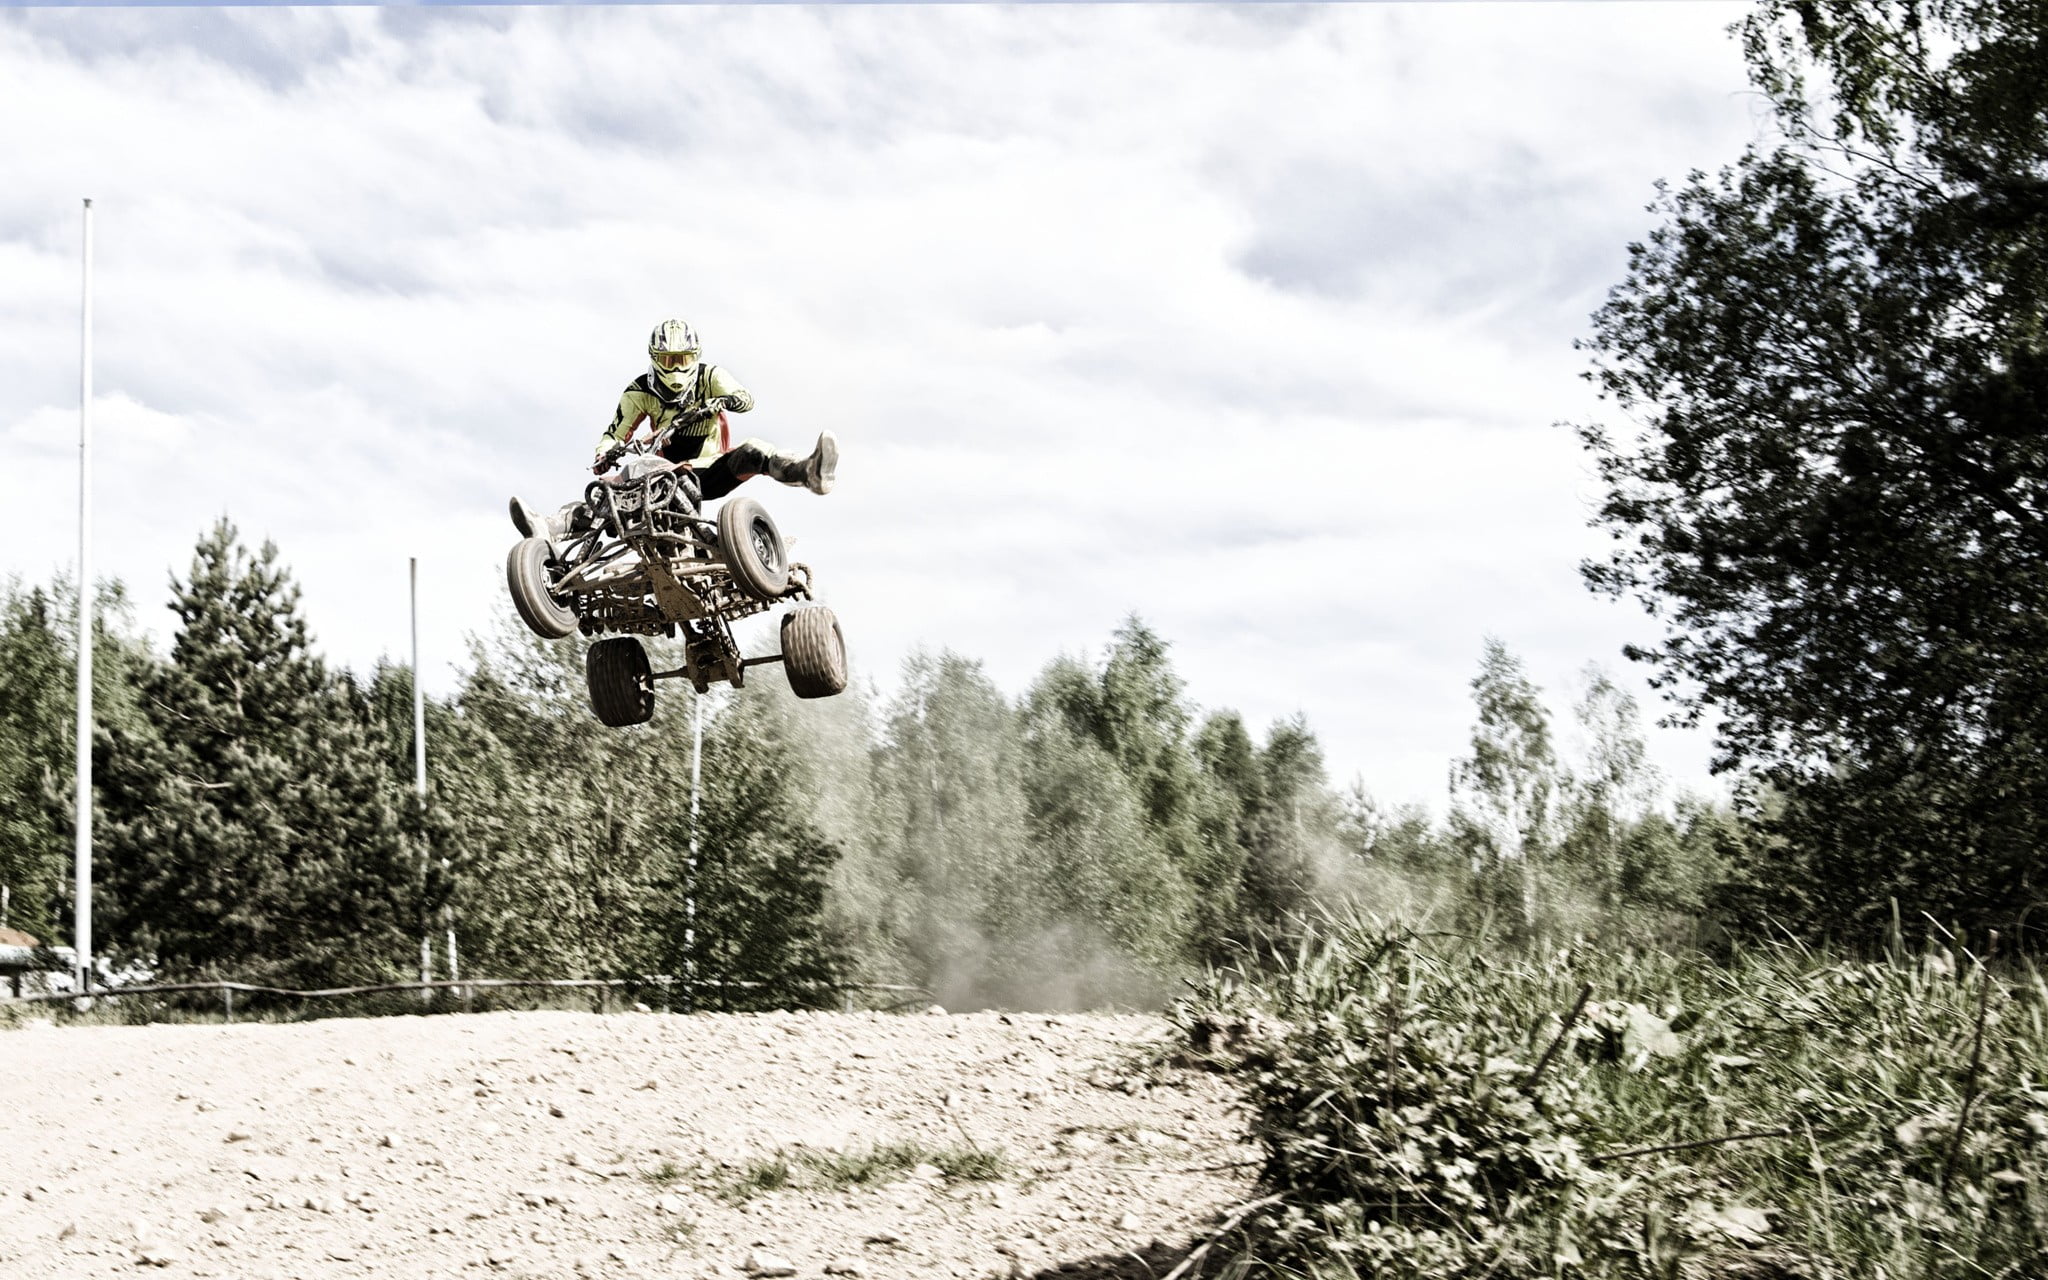 black ATV, forest, nature, sports, road, trees, grass, day, jumping